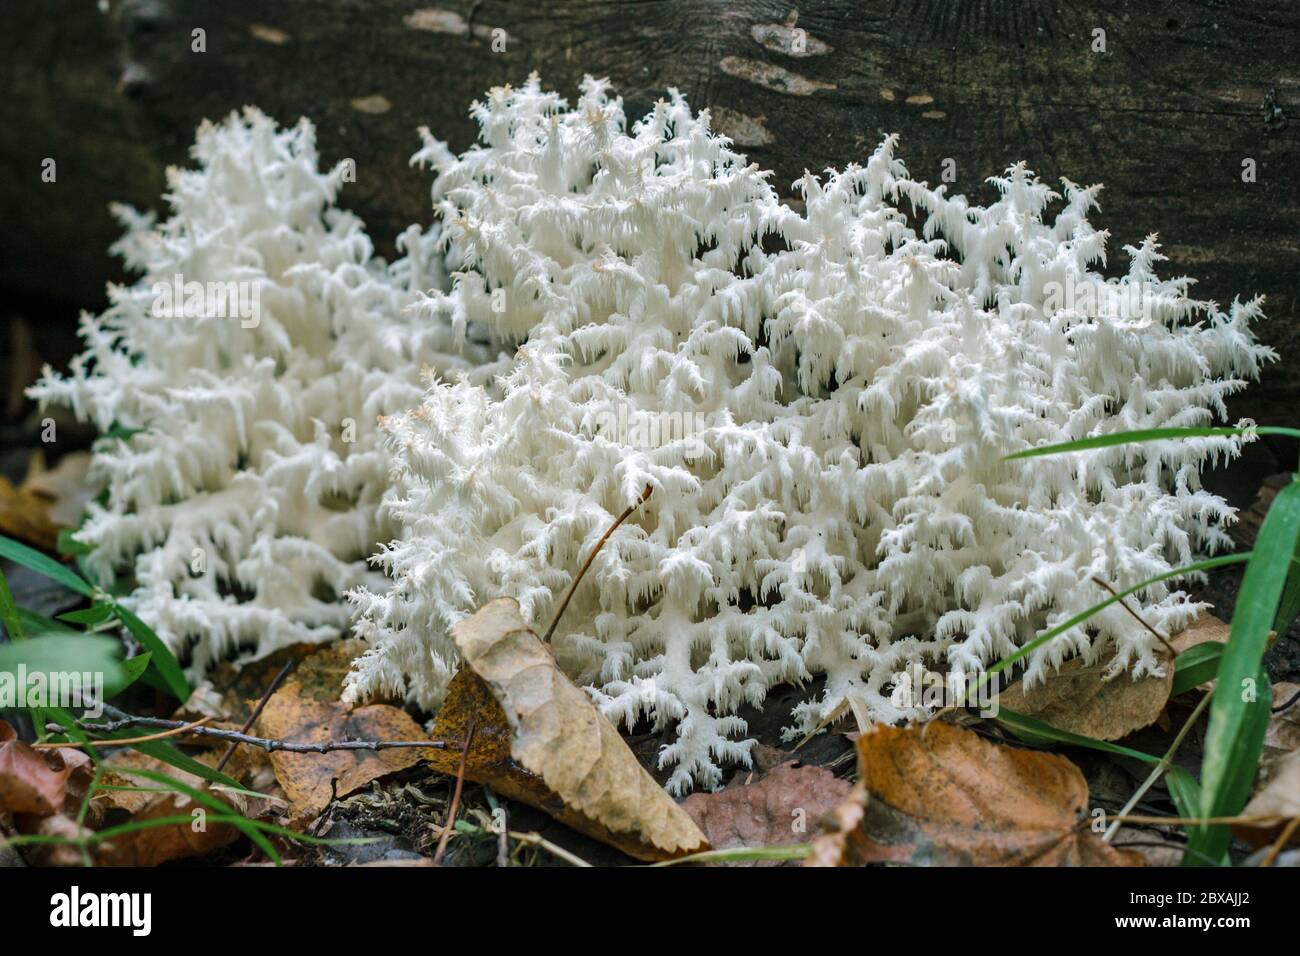 Hericium coralloides, coral tooth fungus, vulnerable on red data list. Edible white coral-like fungus growing in the forest Stock Photo